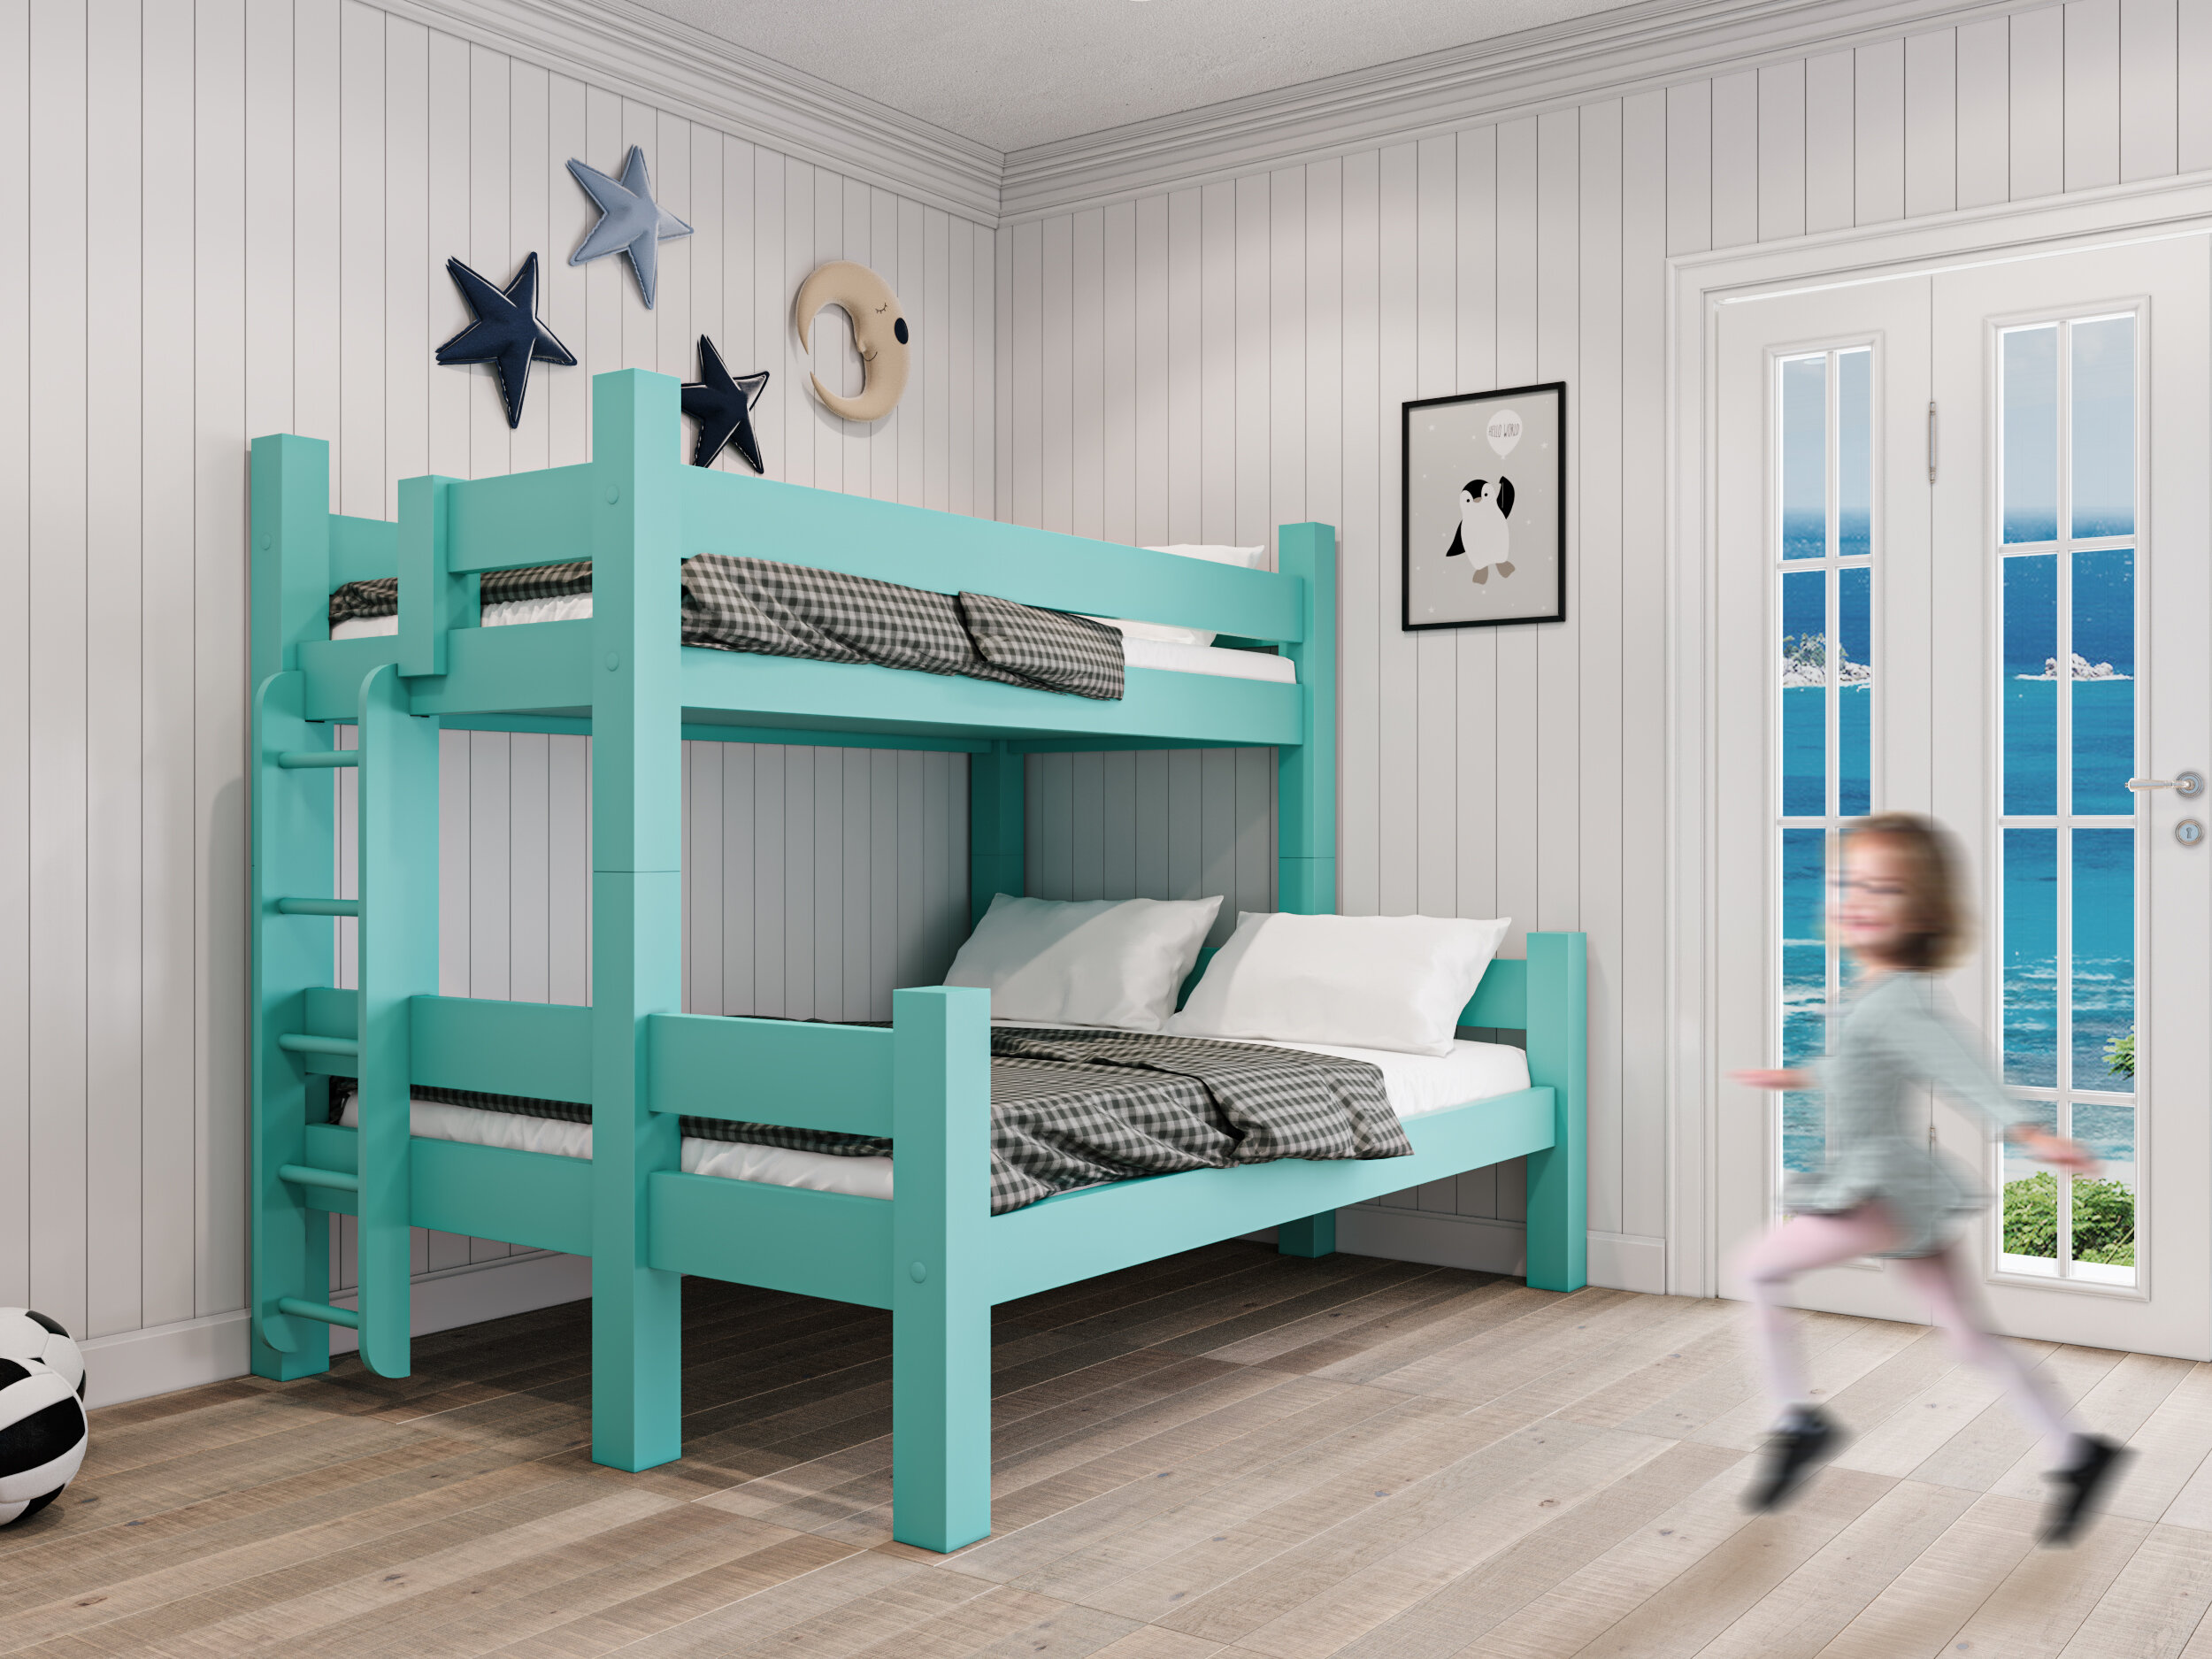 Solid Wood Bunk Beds Wooden, Quality Wooden Bunk Beds